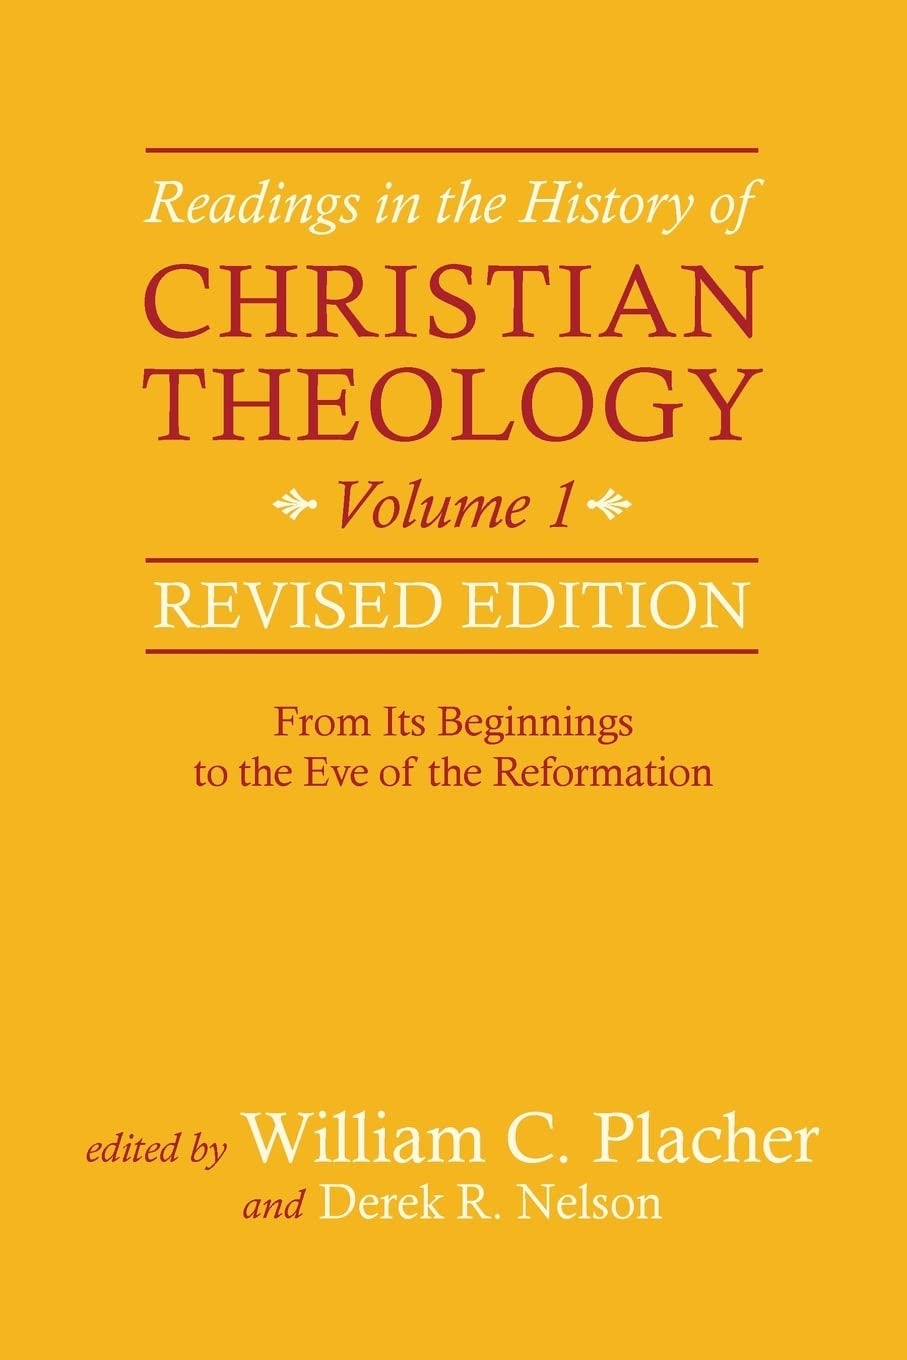 Readings in the History of Christian Theology, Volume 1, Revised